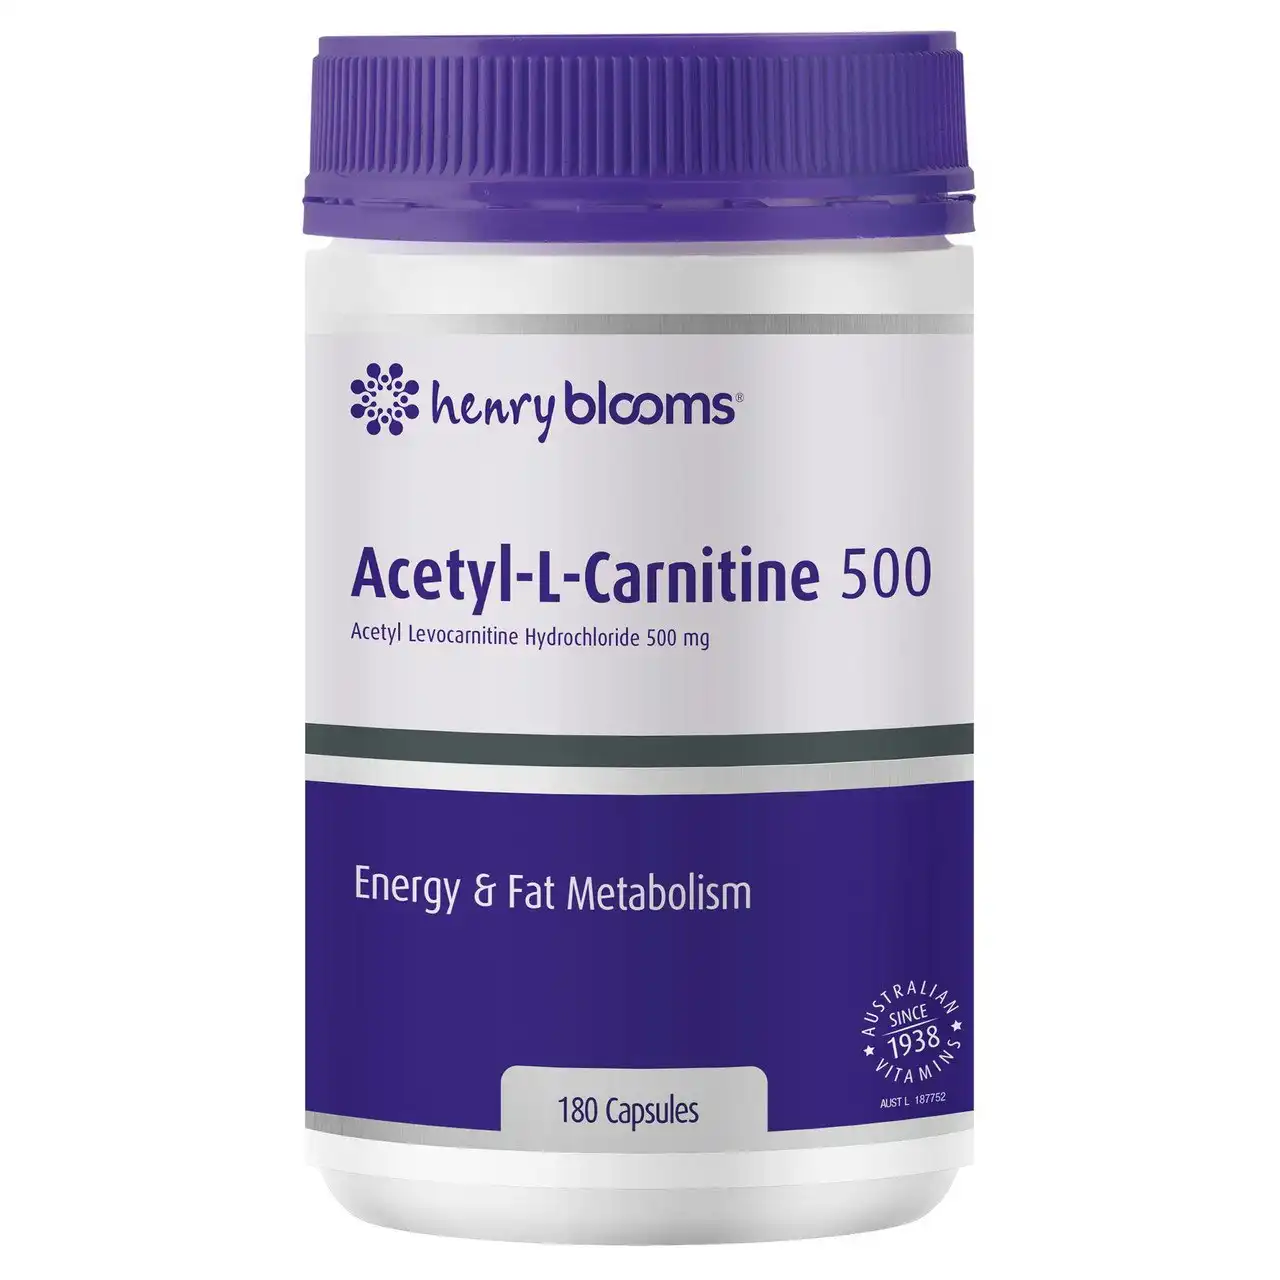 Henry Blooms Acetyl L-Carnitine 500 180 Capsules